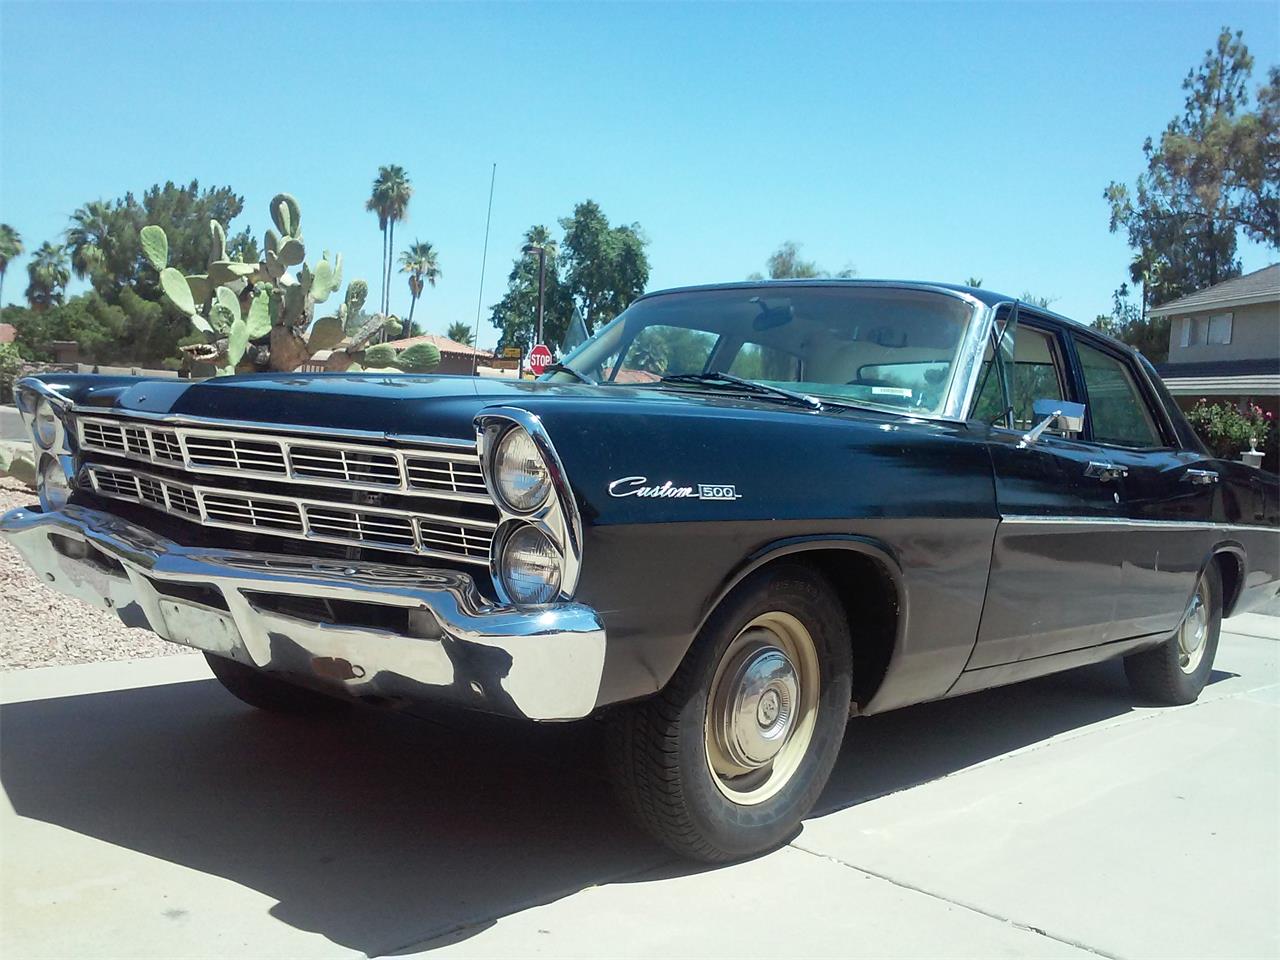 1967 ford galaxie 500 for sale classiccars com cc 886416 1967 ford galaxie 500 for sale